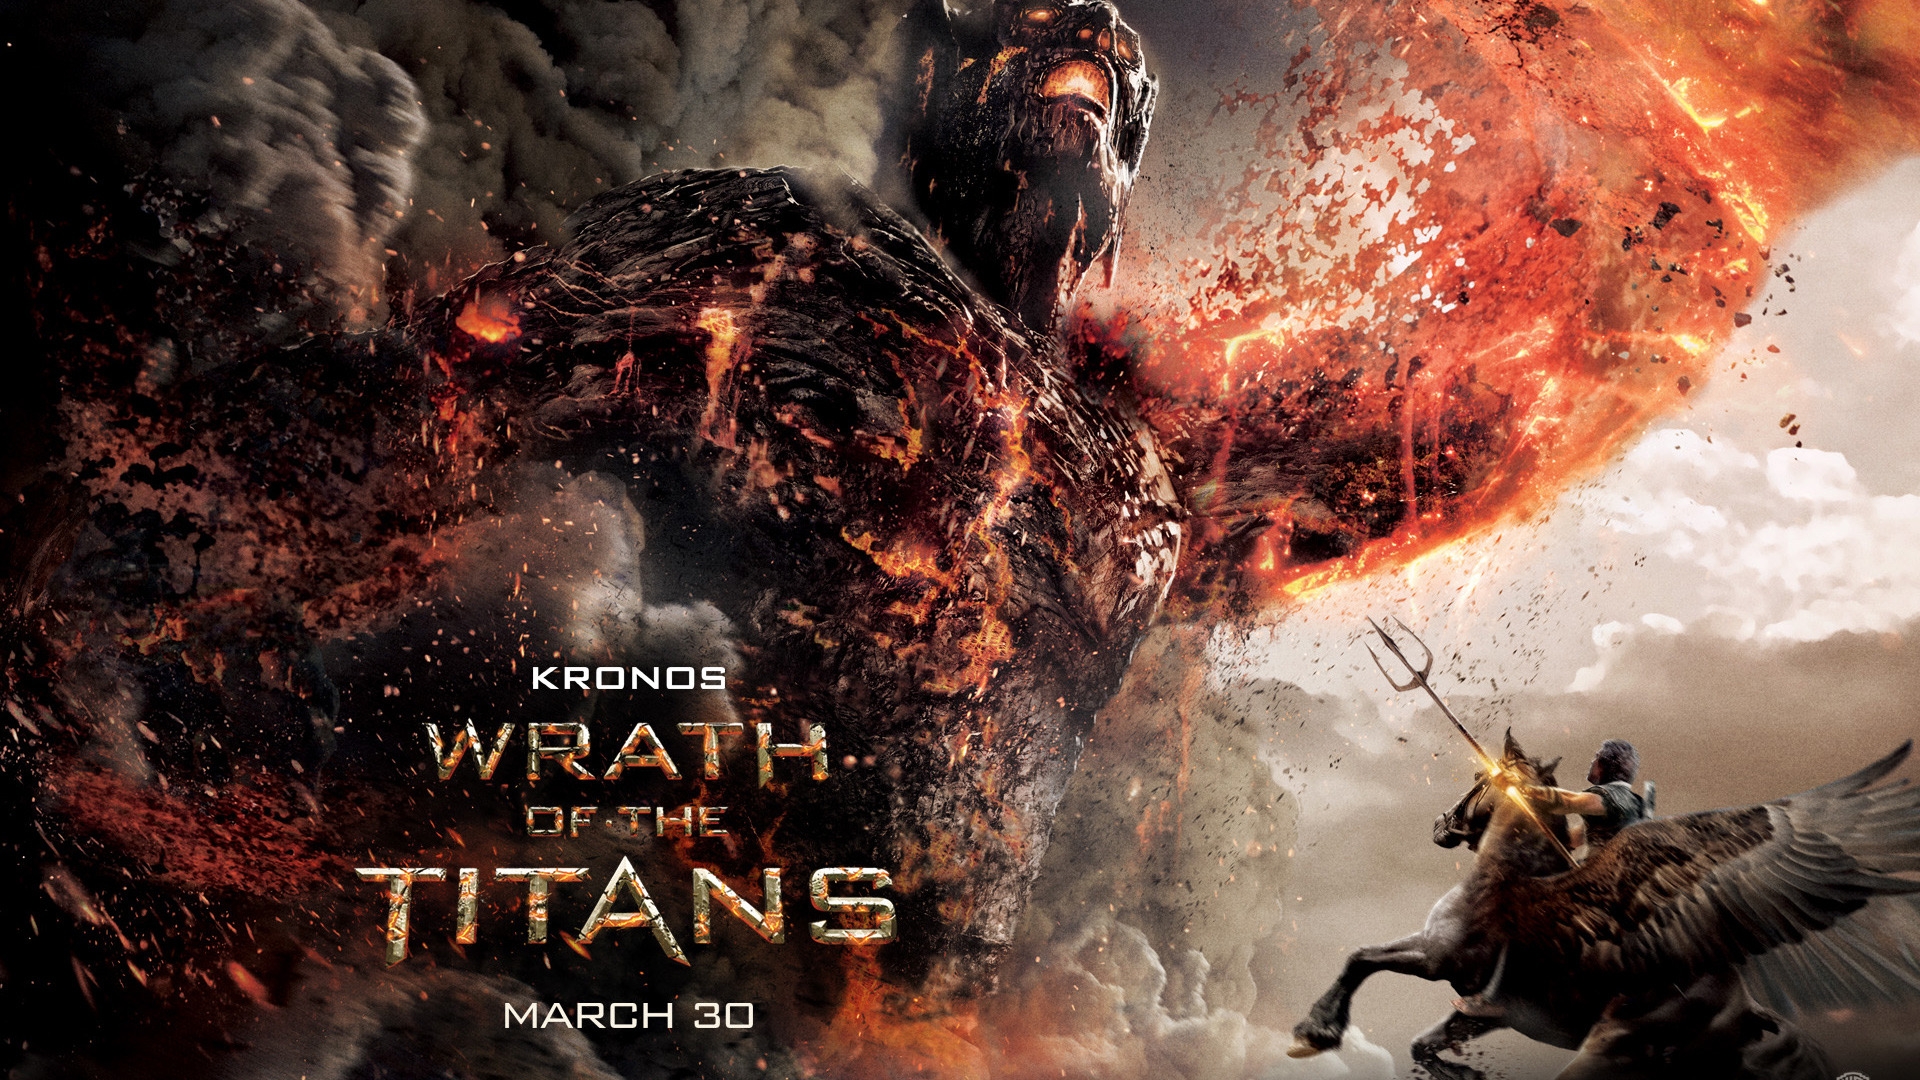 Kronos Wrath of the Titans for 1920 x 1080 HDTV 1080p resolution